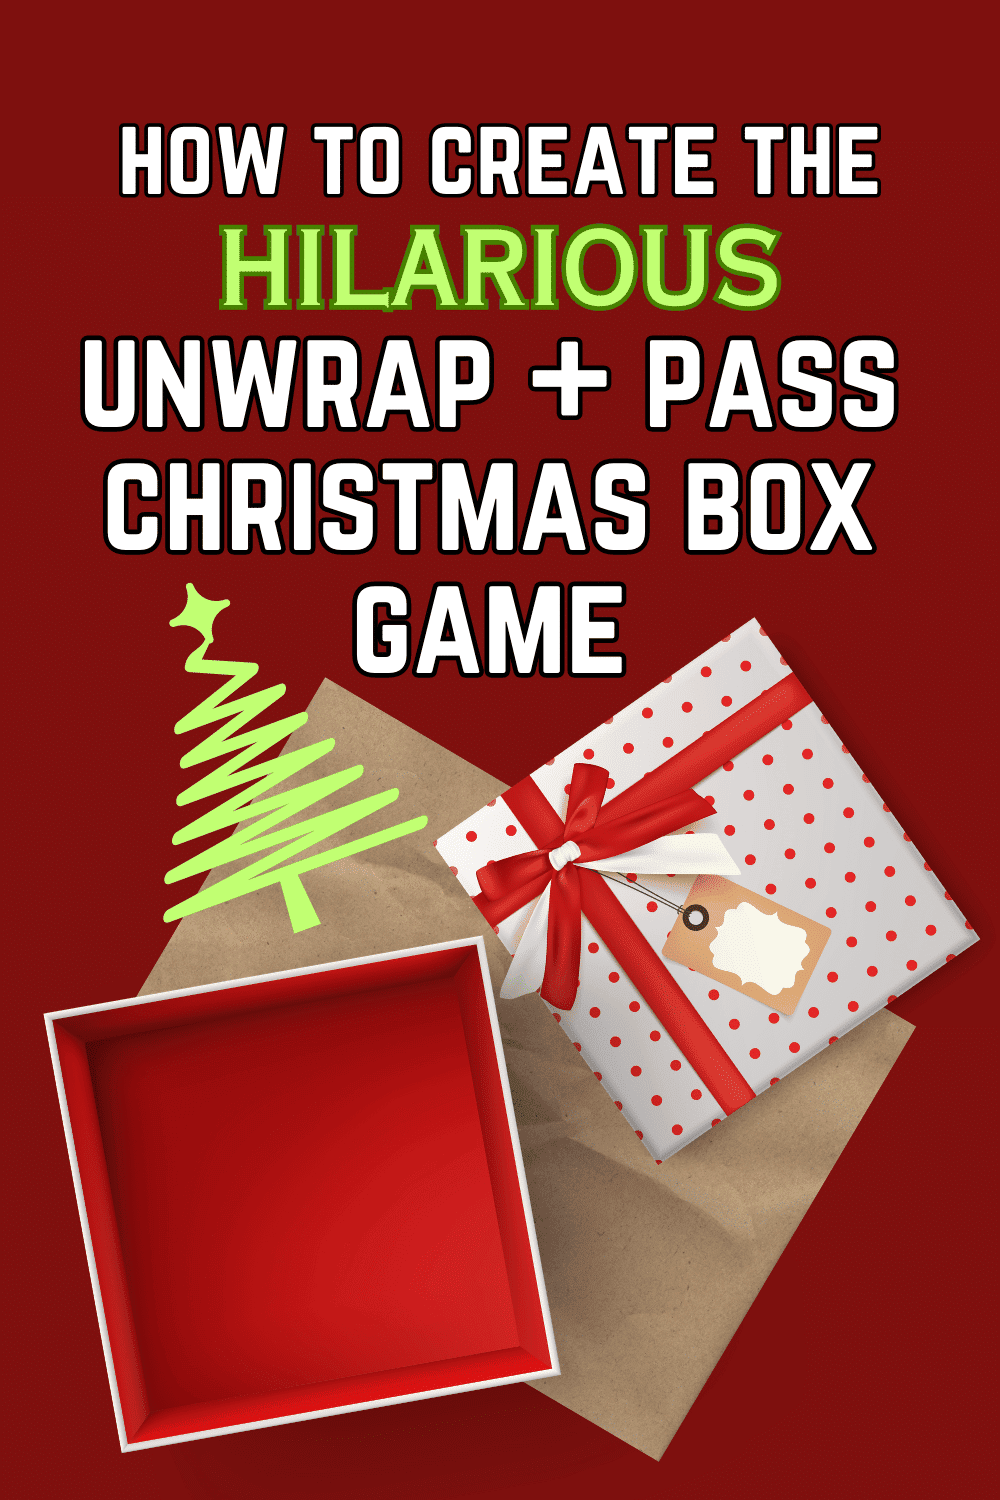 How To Make A Gift Pass Game For Christmas Games (Fun Dice Games) empty Christmas present box with text over it